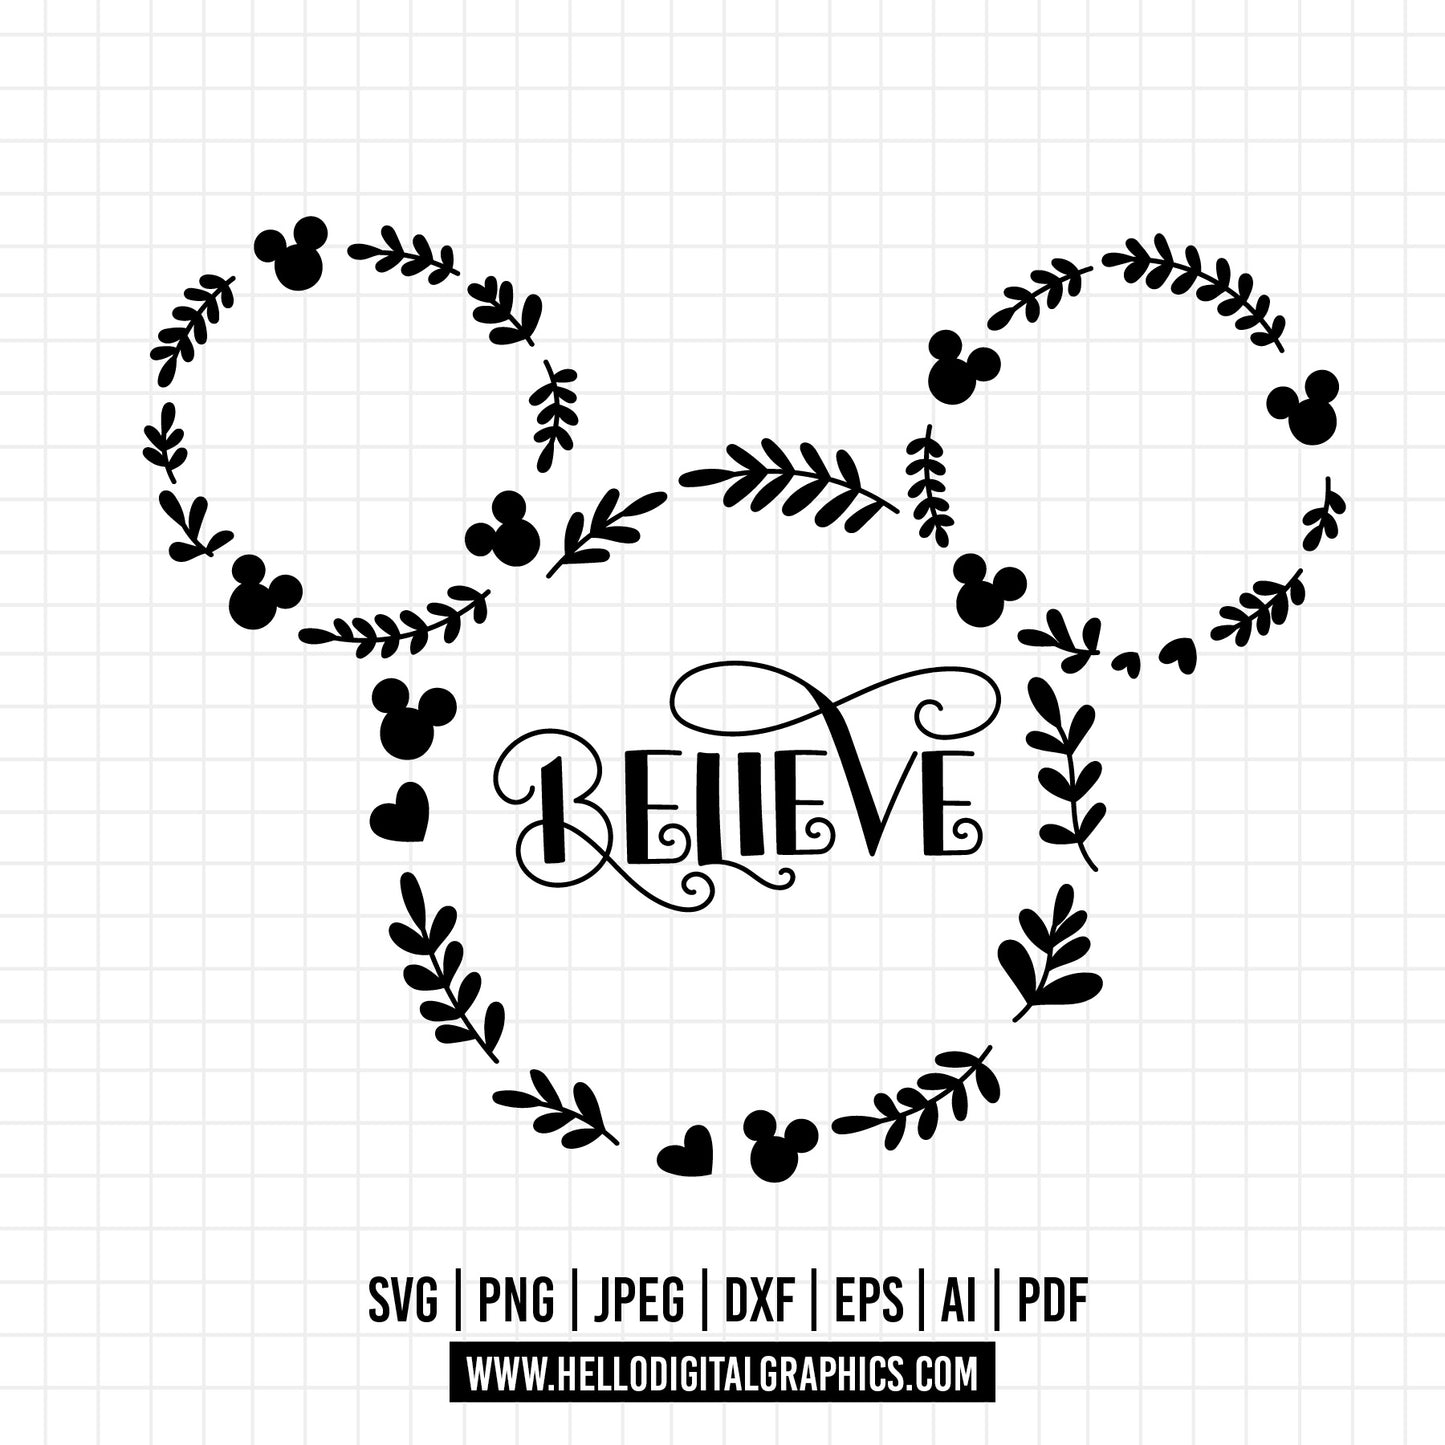 COD1238 Believe svg, Magical Svg, Mickey Svg, Castle svg, Disney svg, Magical svg, Disney quote